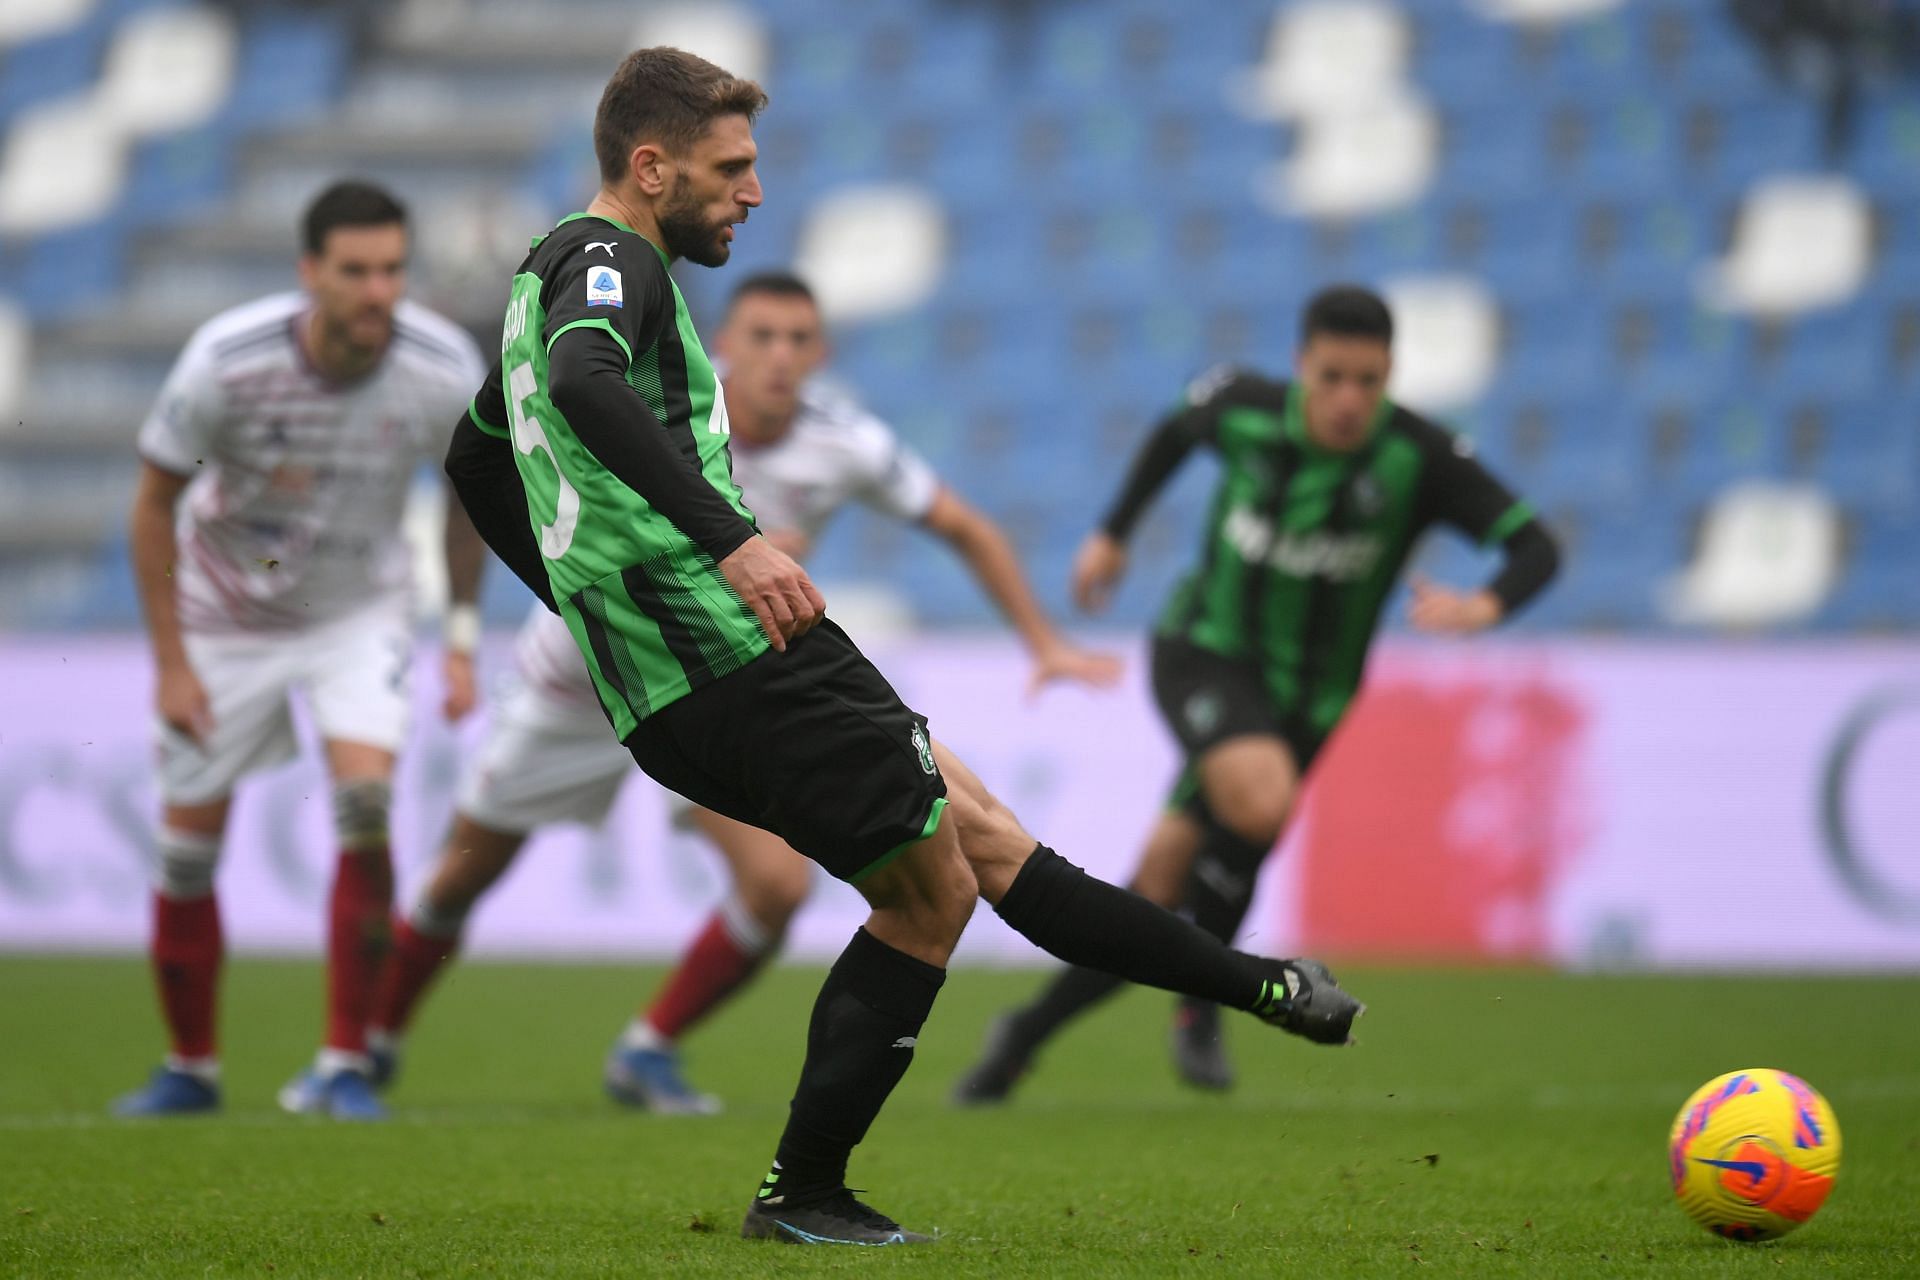 Cagliari host Sassuolo in their upcoming Serie A fixture on Saturday